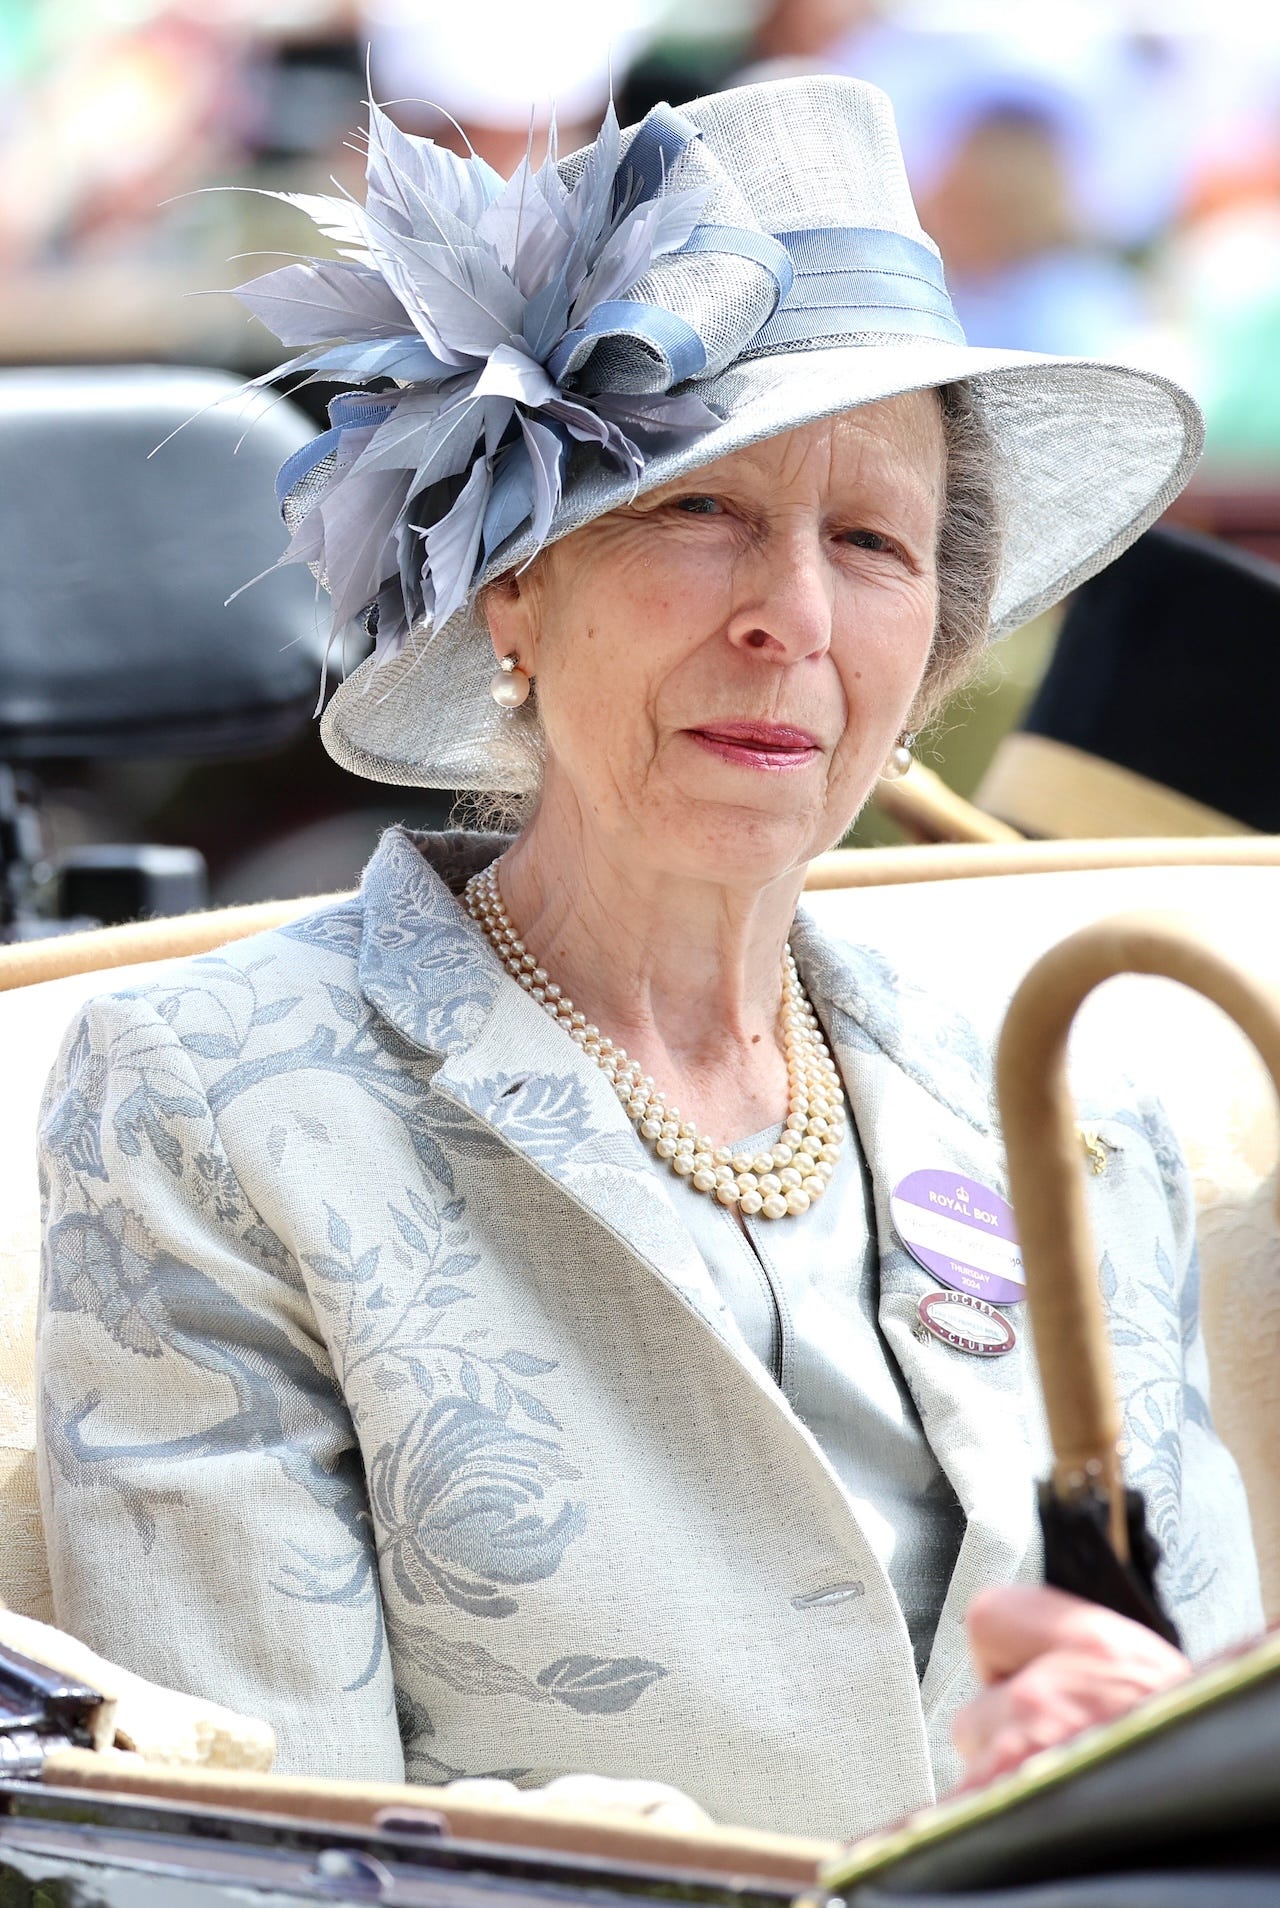 <p>On Thursday, the Princess Royal opted for another botanical-embroidered summer coat at Royal Ascot. But unlike her day one ensemble, her outfit was designed in cooler blue and light-purple tones.</p><p>Anne accessorized with a trio of pearl necklaces, pearl earrings, and a lilac hat with a floral bouquet made of feathers.</p>